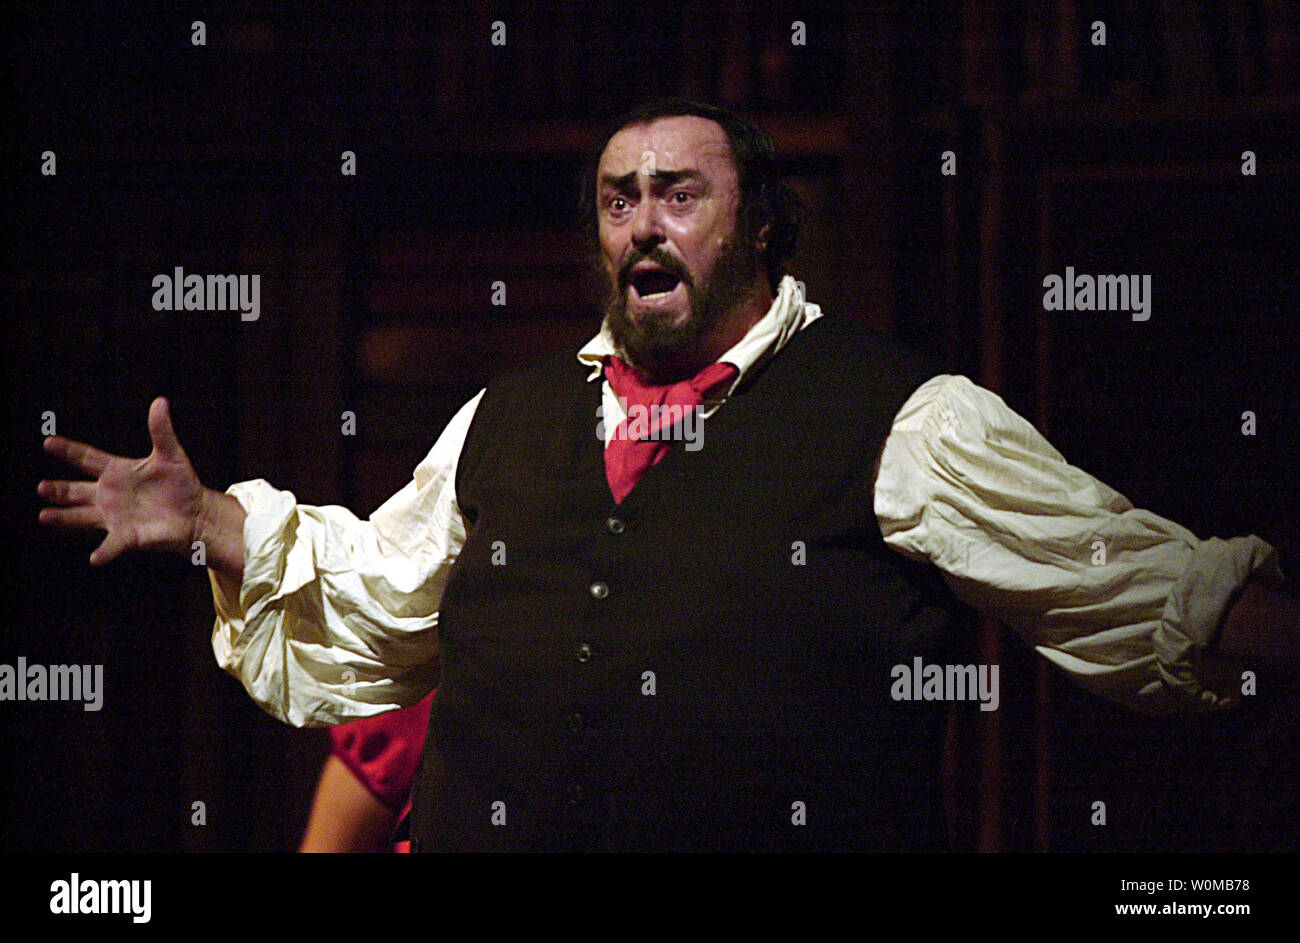 Luciano Pavarotti, pictured in a May 6, 2002 file photo in New York, died at his home in Modena, Italy on September 6, 2007. Pavarotti, who was 71 years old, was diagnosed with pancreatic cancer in 2006. (UPI Photo/Ezio Petersen/FILES) Stock Photo